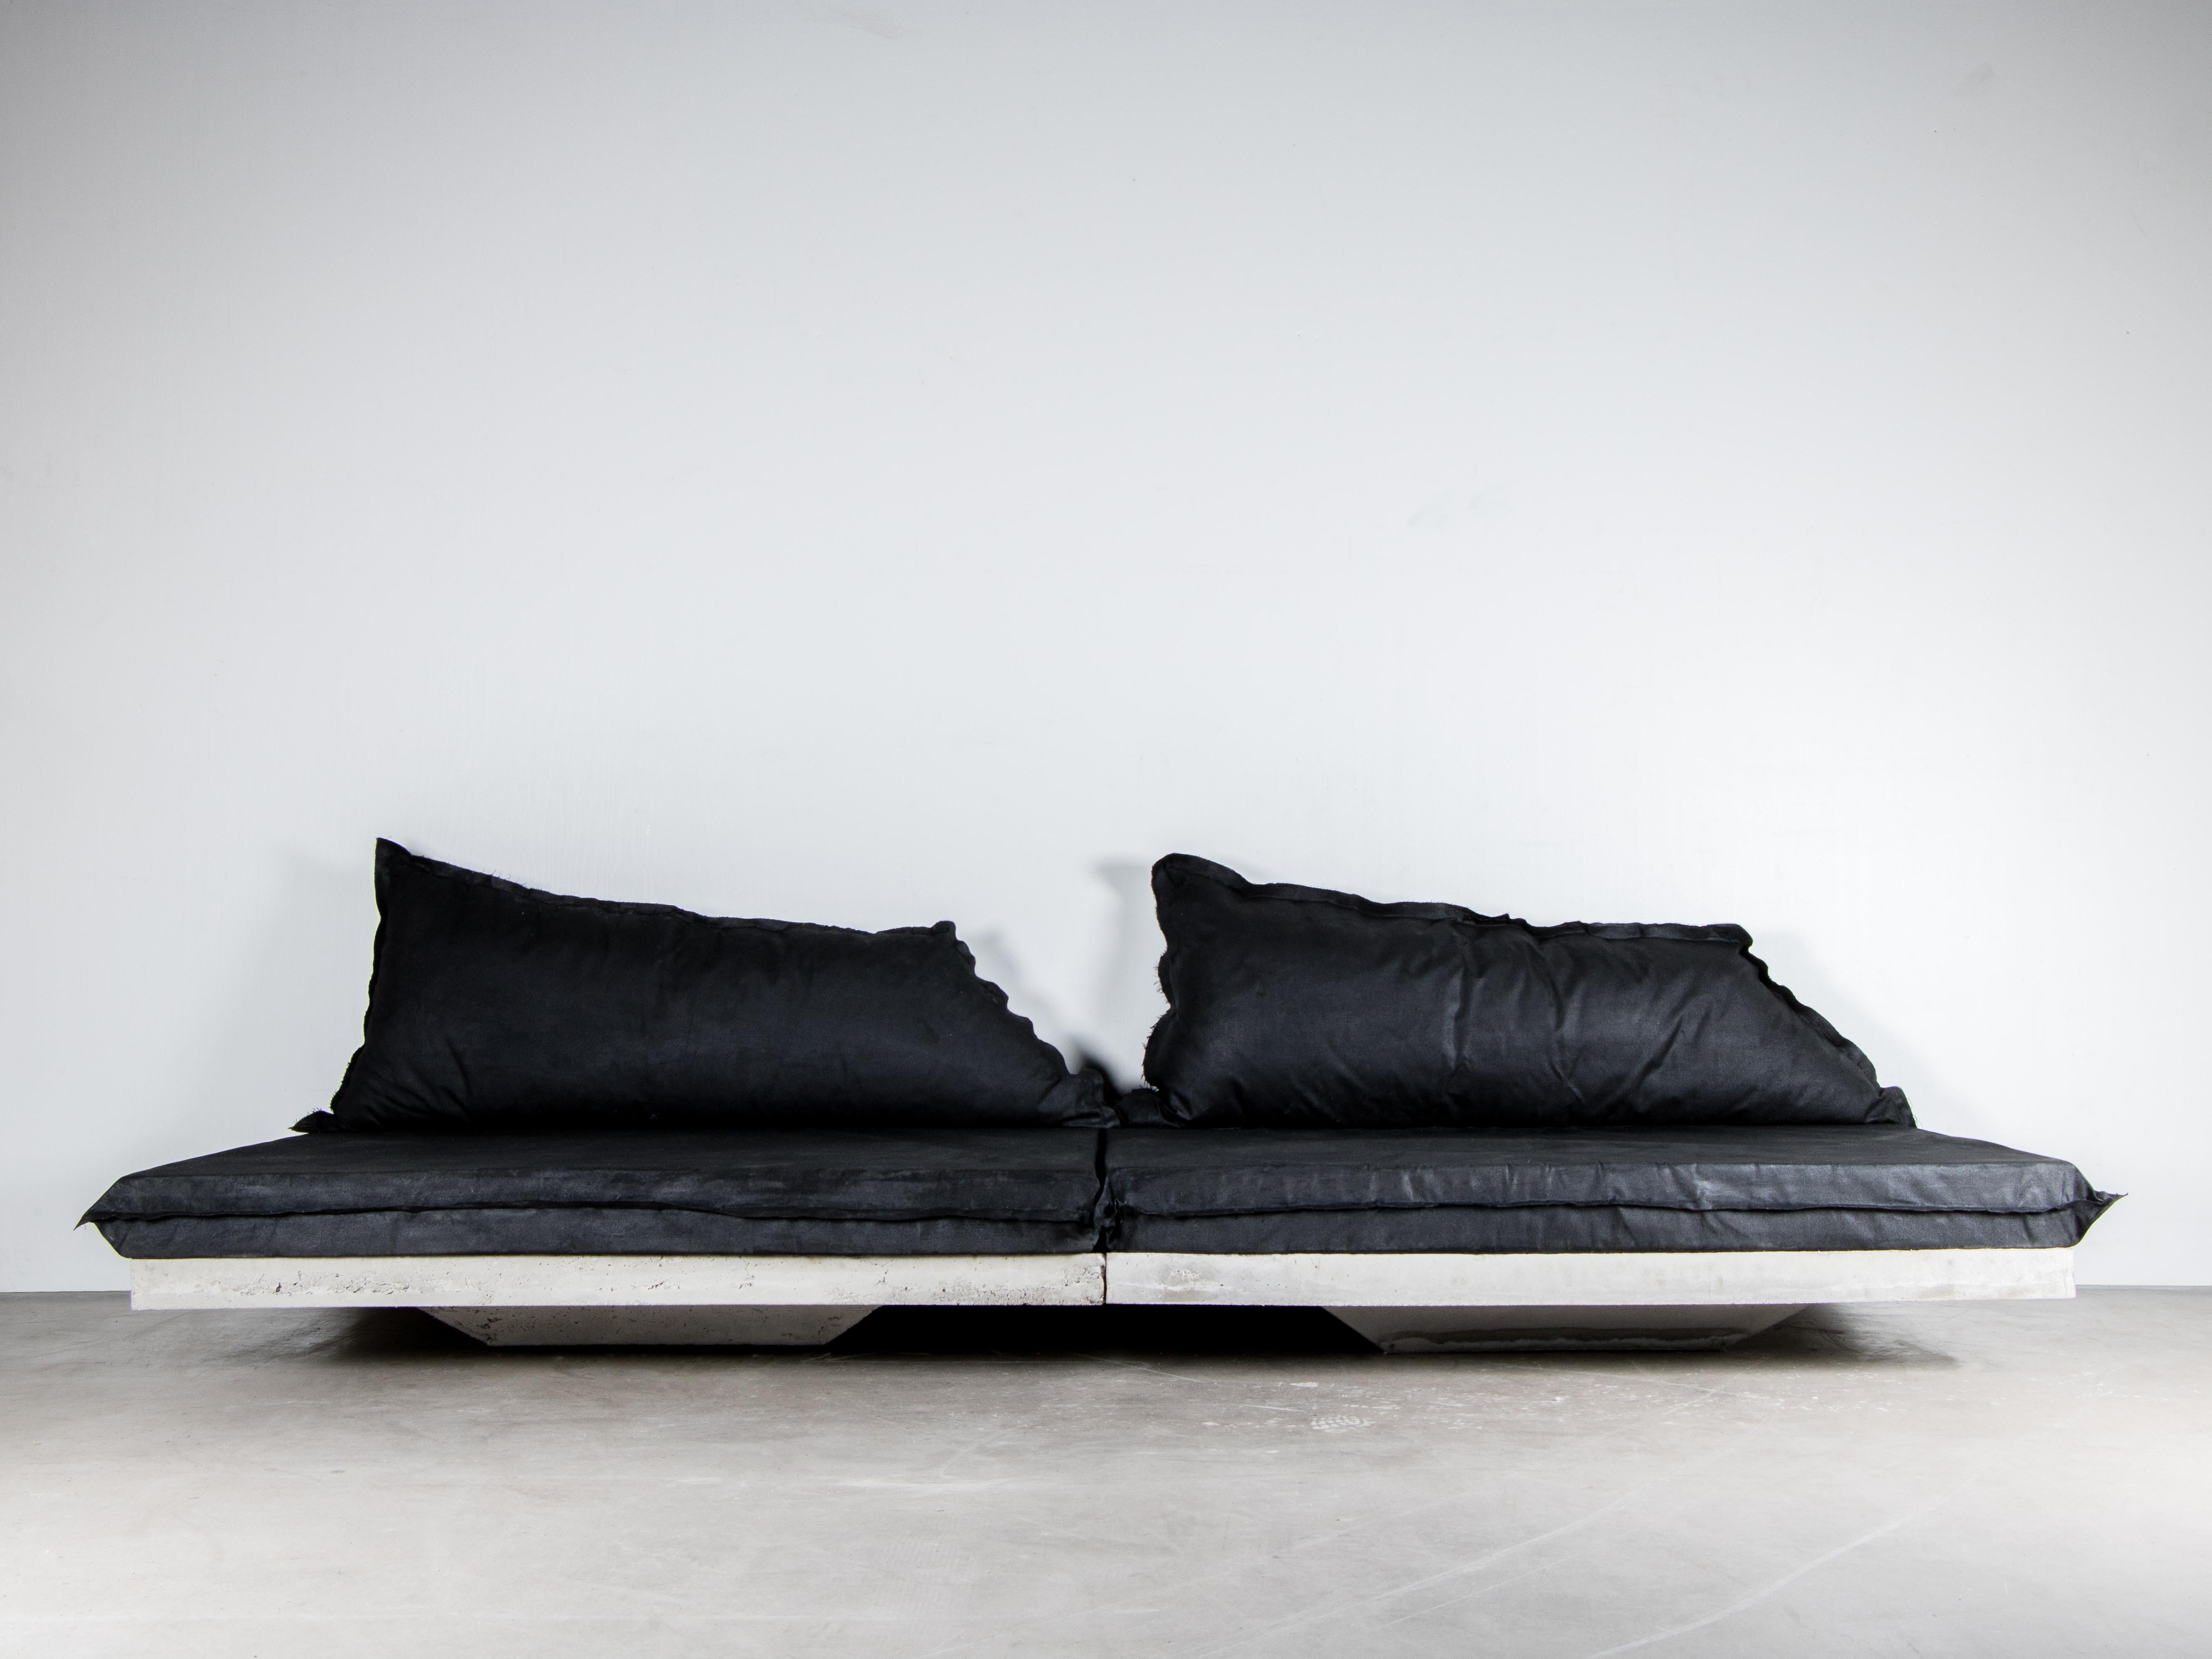 Contemporary Upholstered Black/Grey Sofa in Concrete - Svav Sofa by Lucas Morten

2020
Limited edition of 19 +2 AP
Dimensions: H 32, D 110, W 140 cm (DETAILS PER MODULE)
Material: concrete and hand-waxed upholstered cushion

A floating